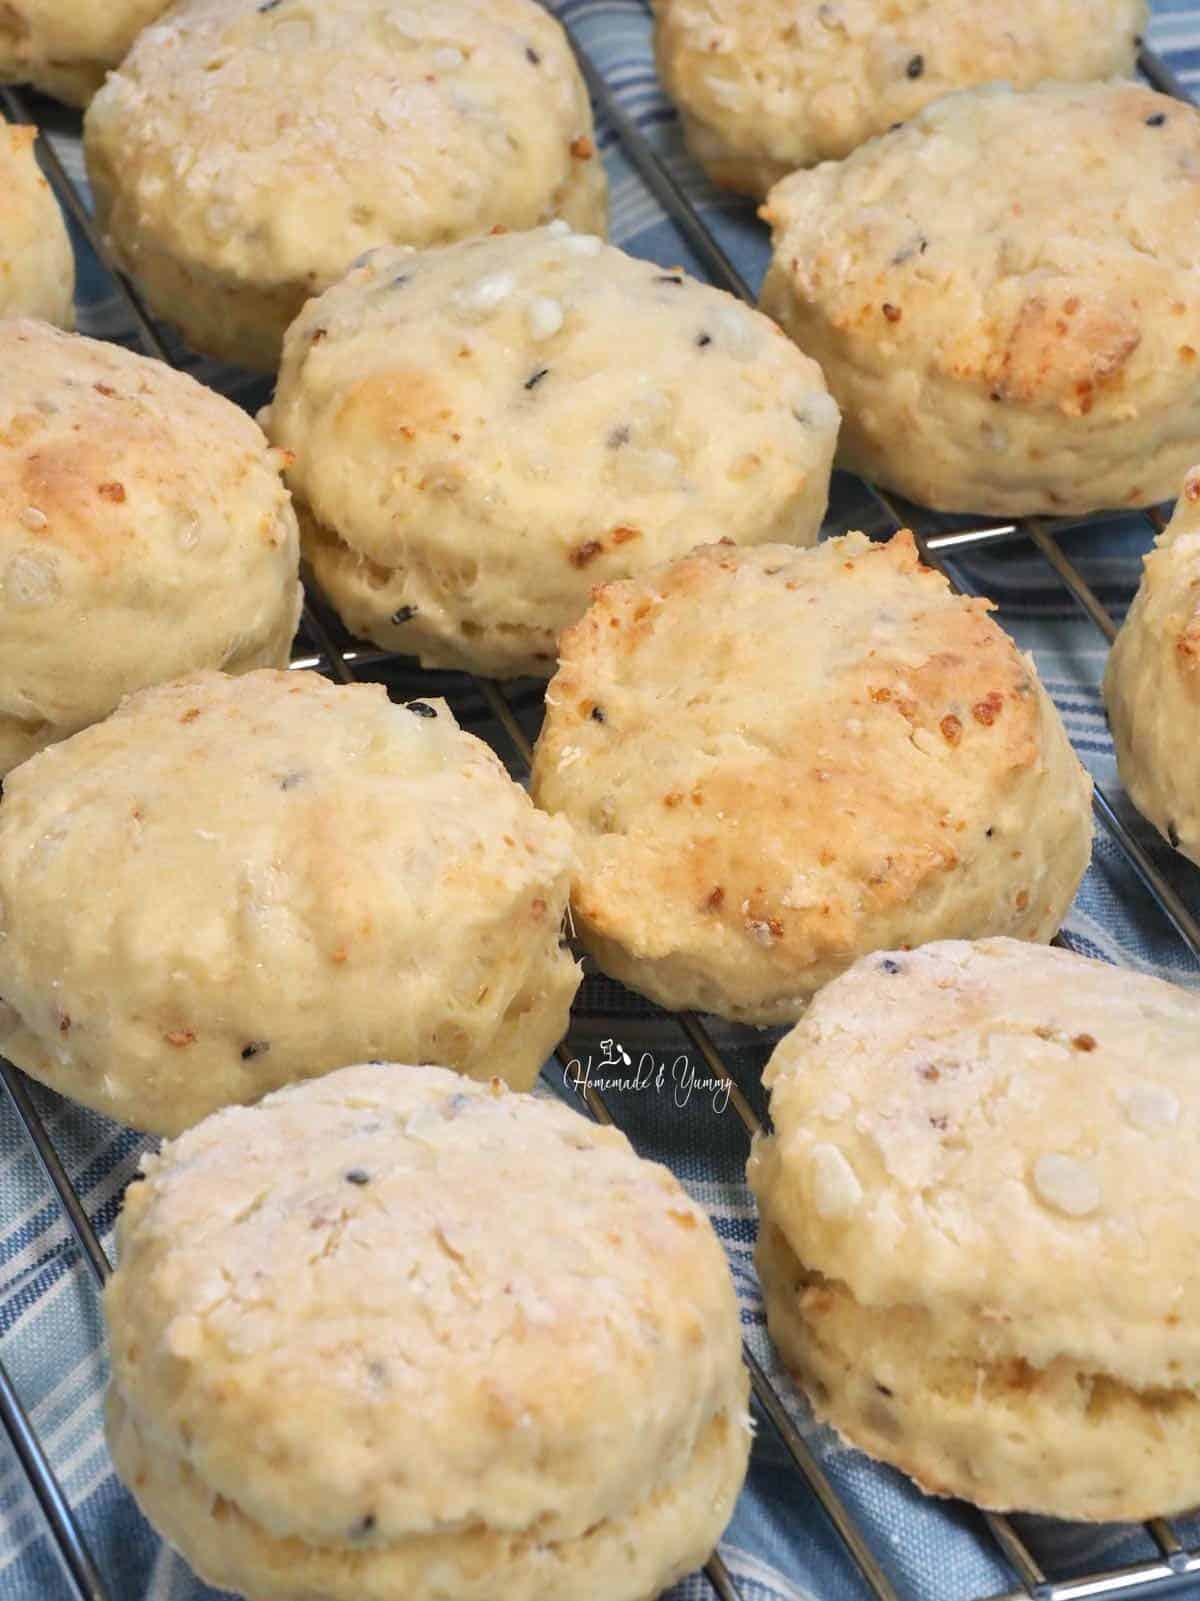 Warm biscuits cooling on a rack.